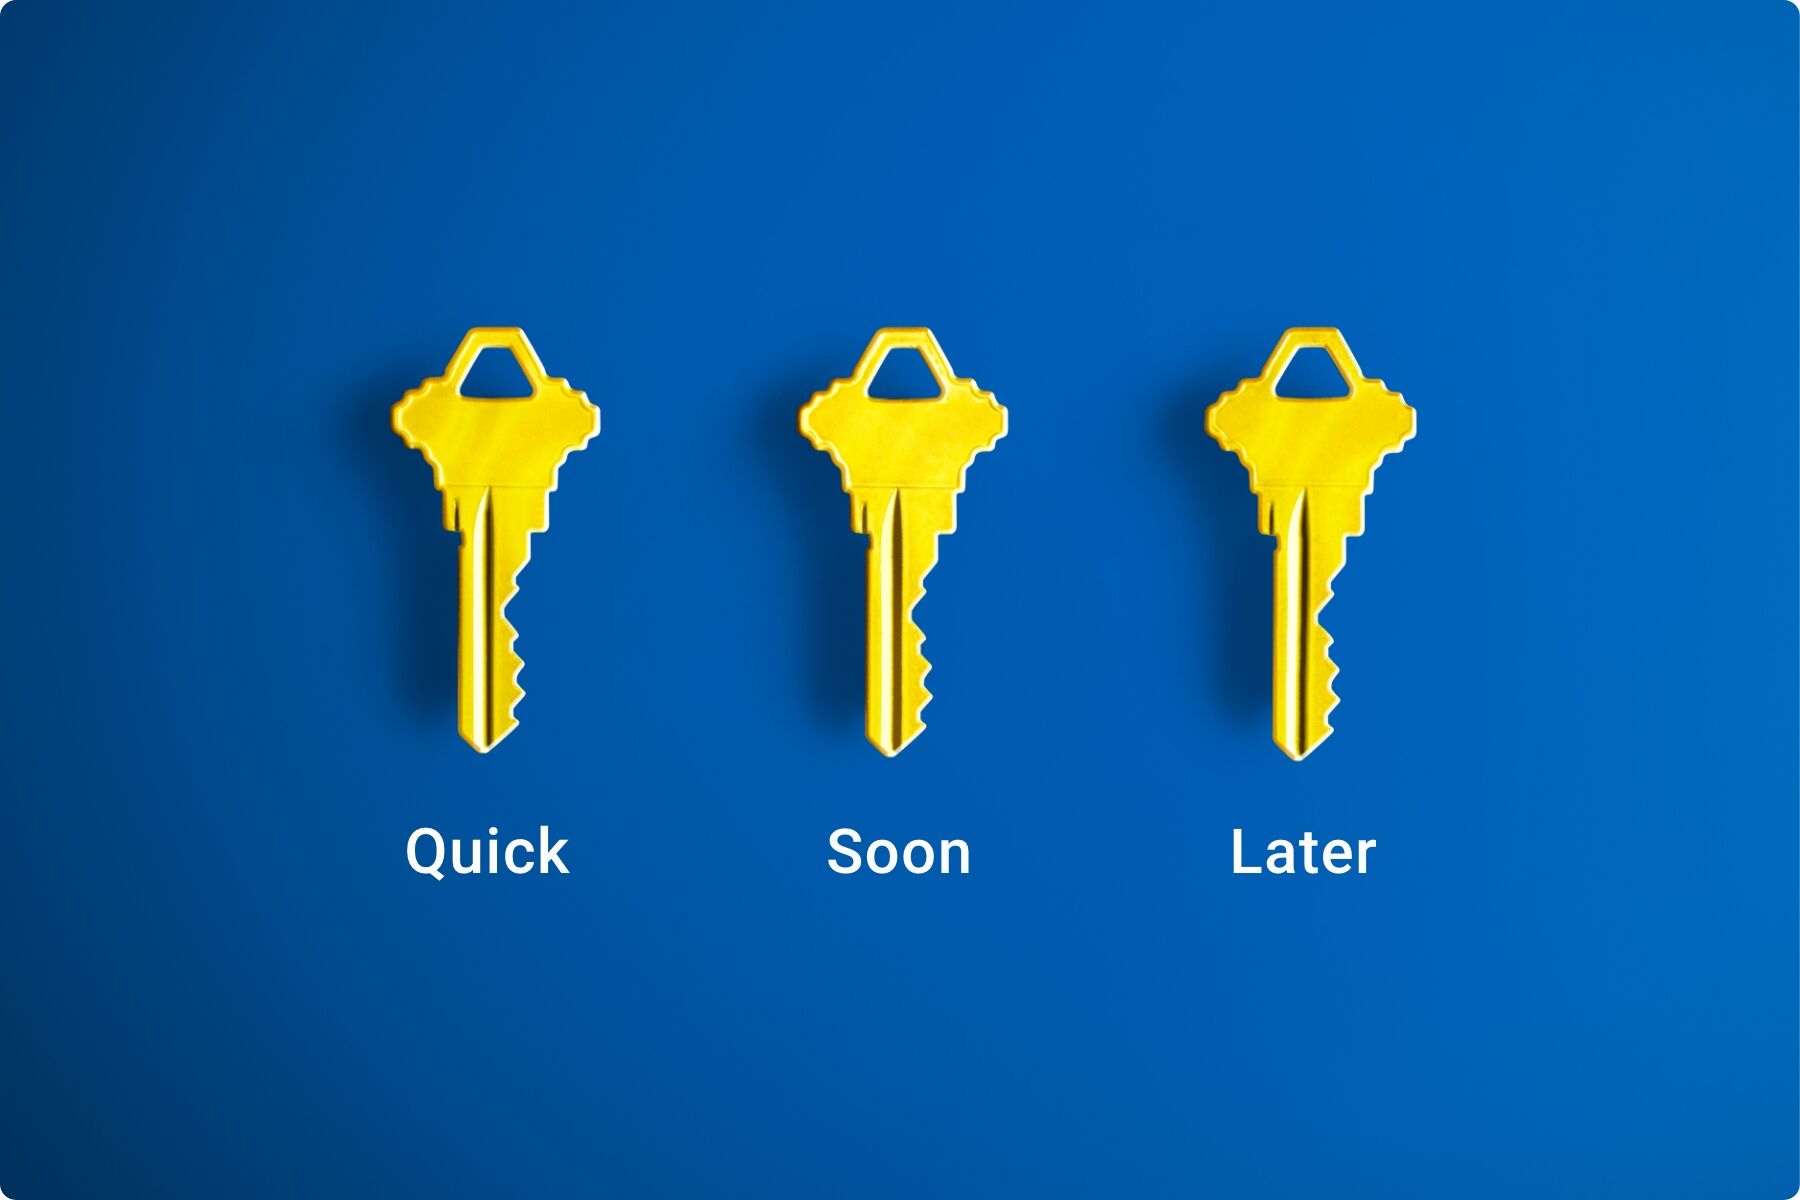 Medium blue background with three yellow keys beside each other with the words 'Quick', 'Soon' and 'Later' underneath each key.